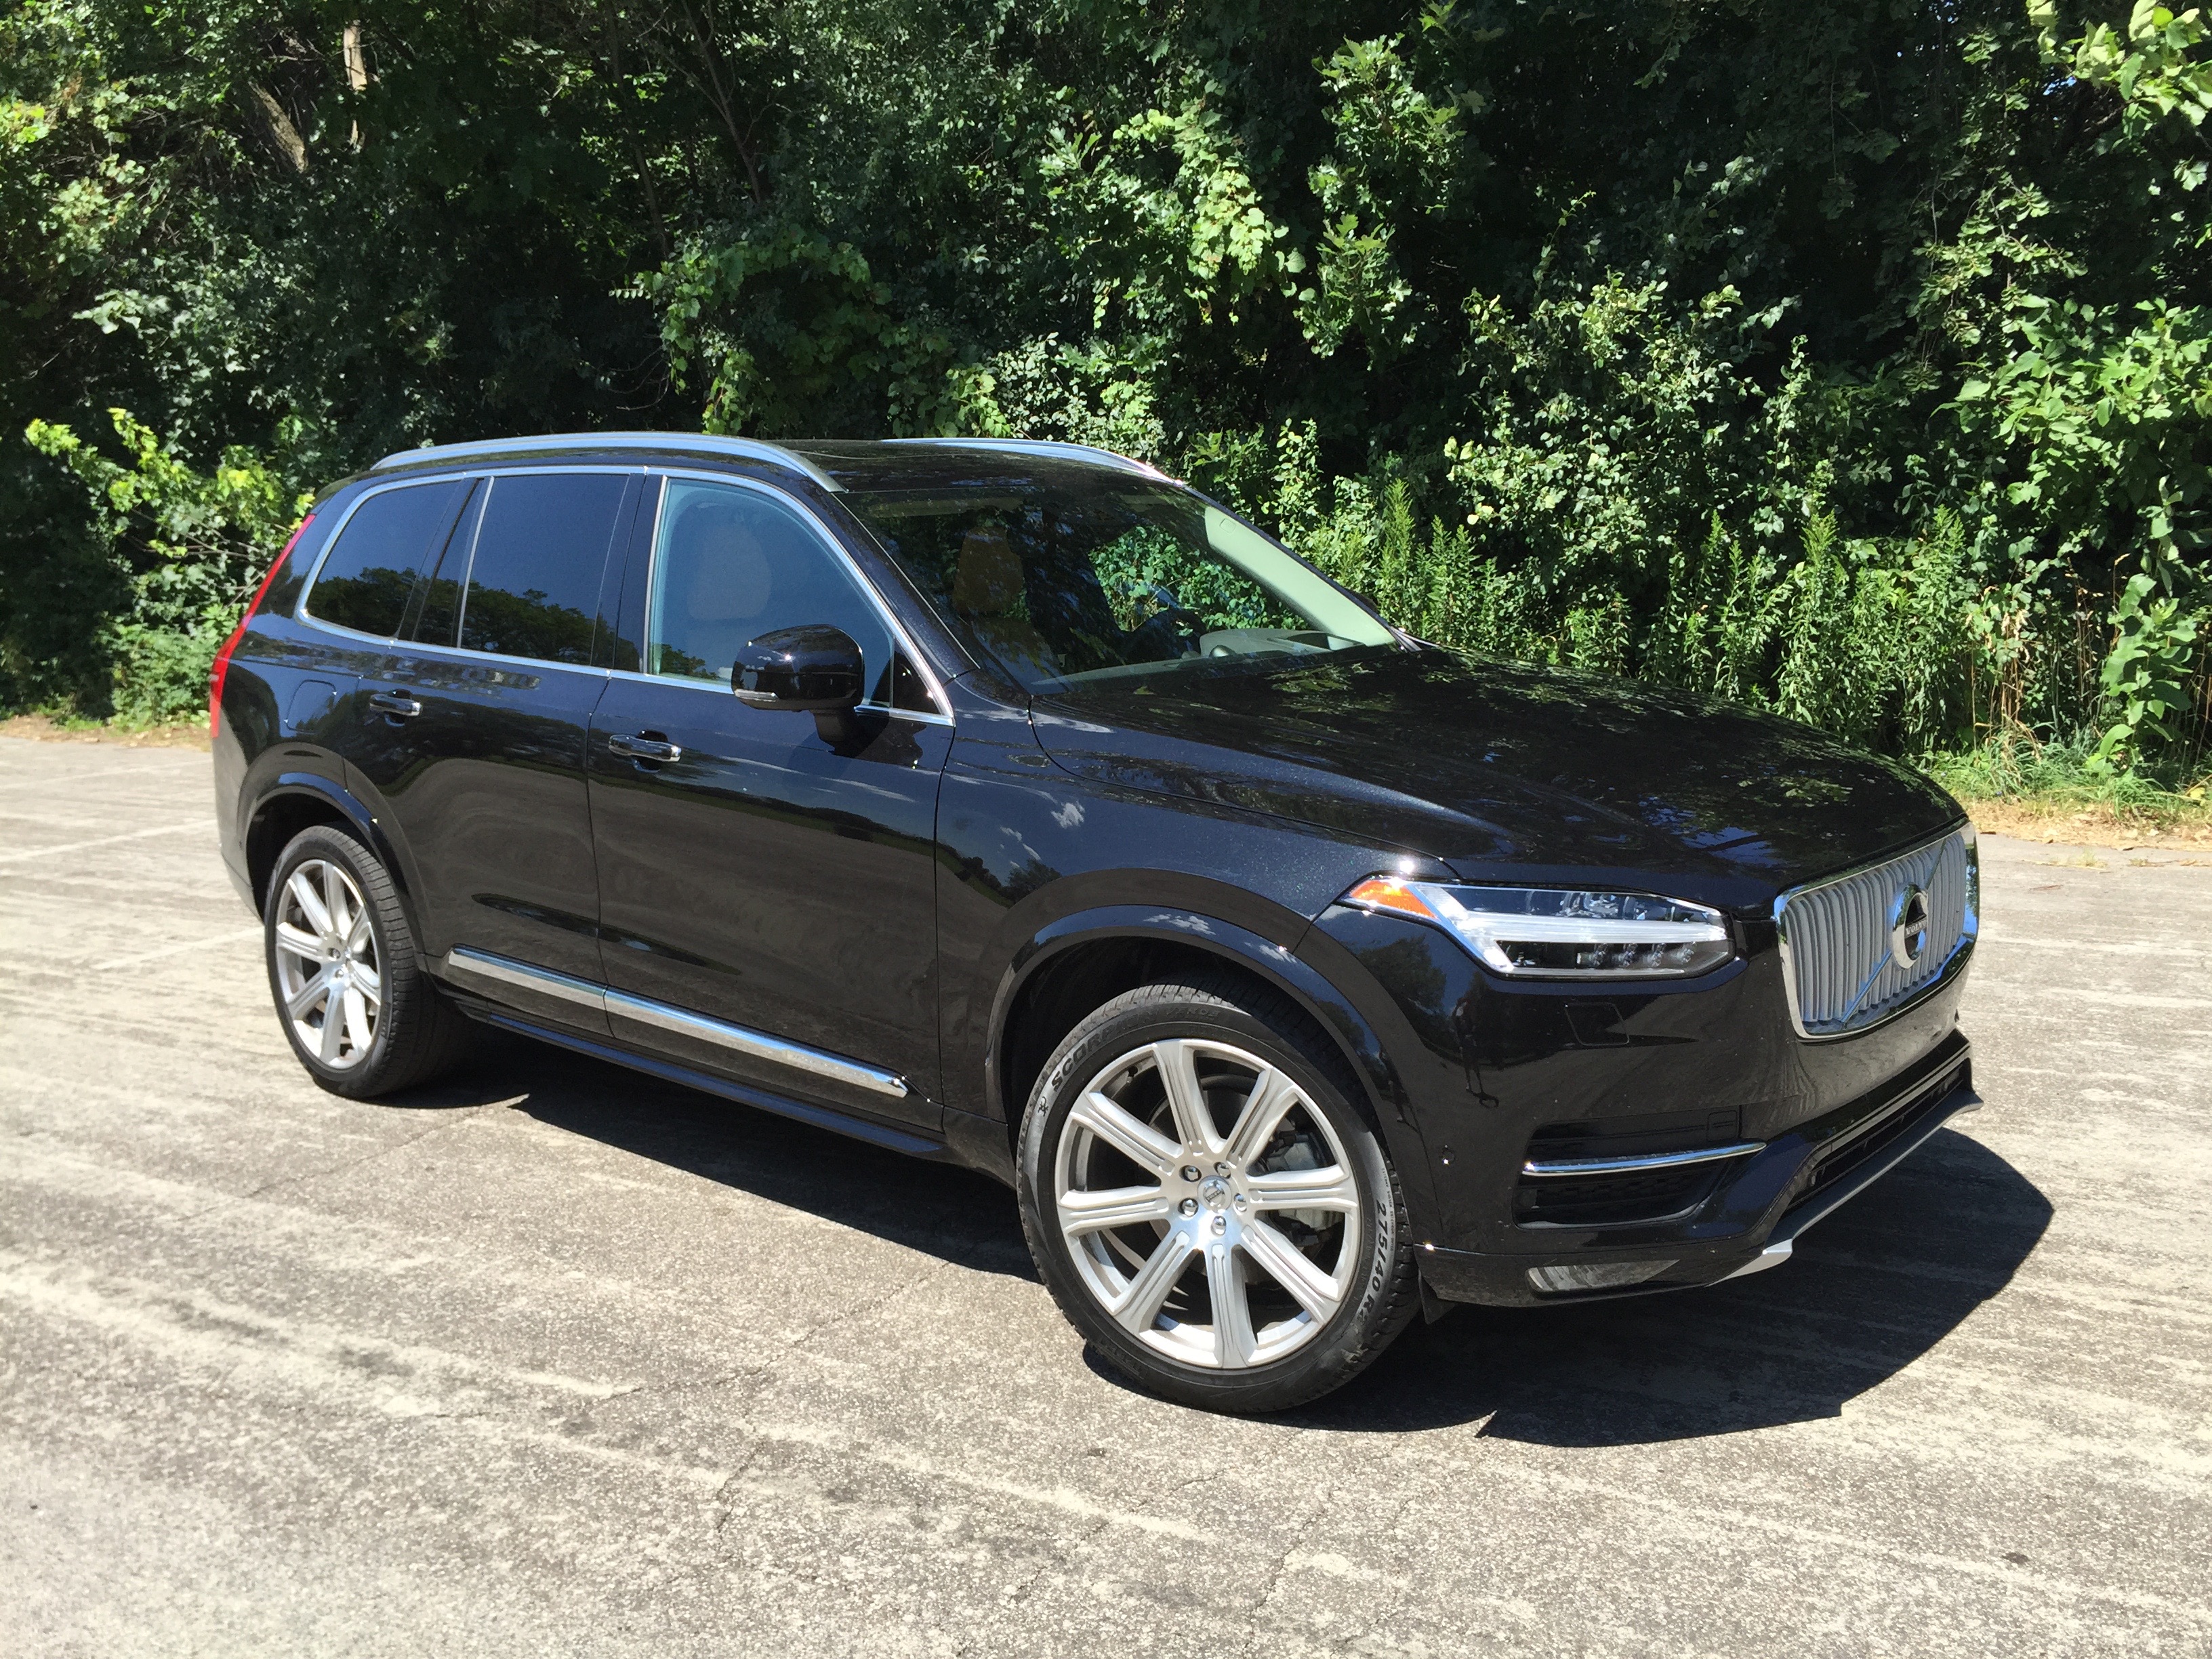 Notes From The Driveway: 2016 Volvo XC90